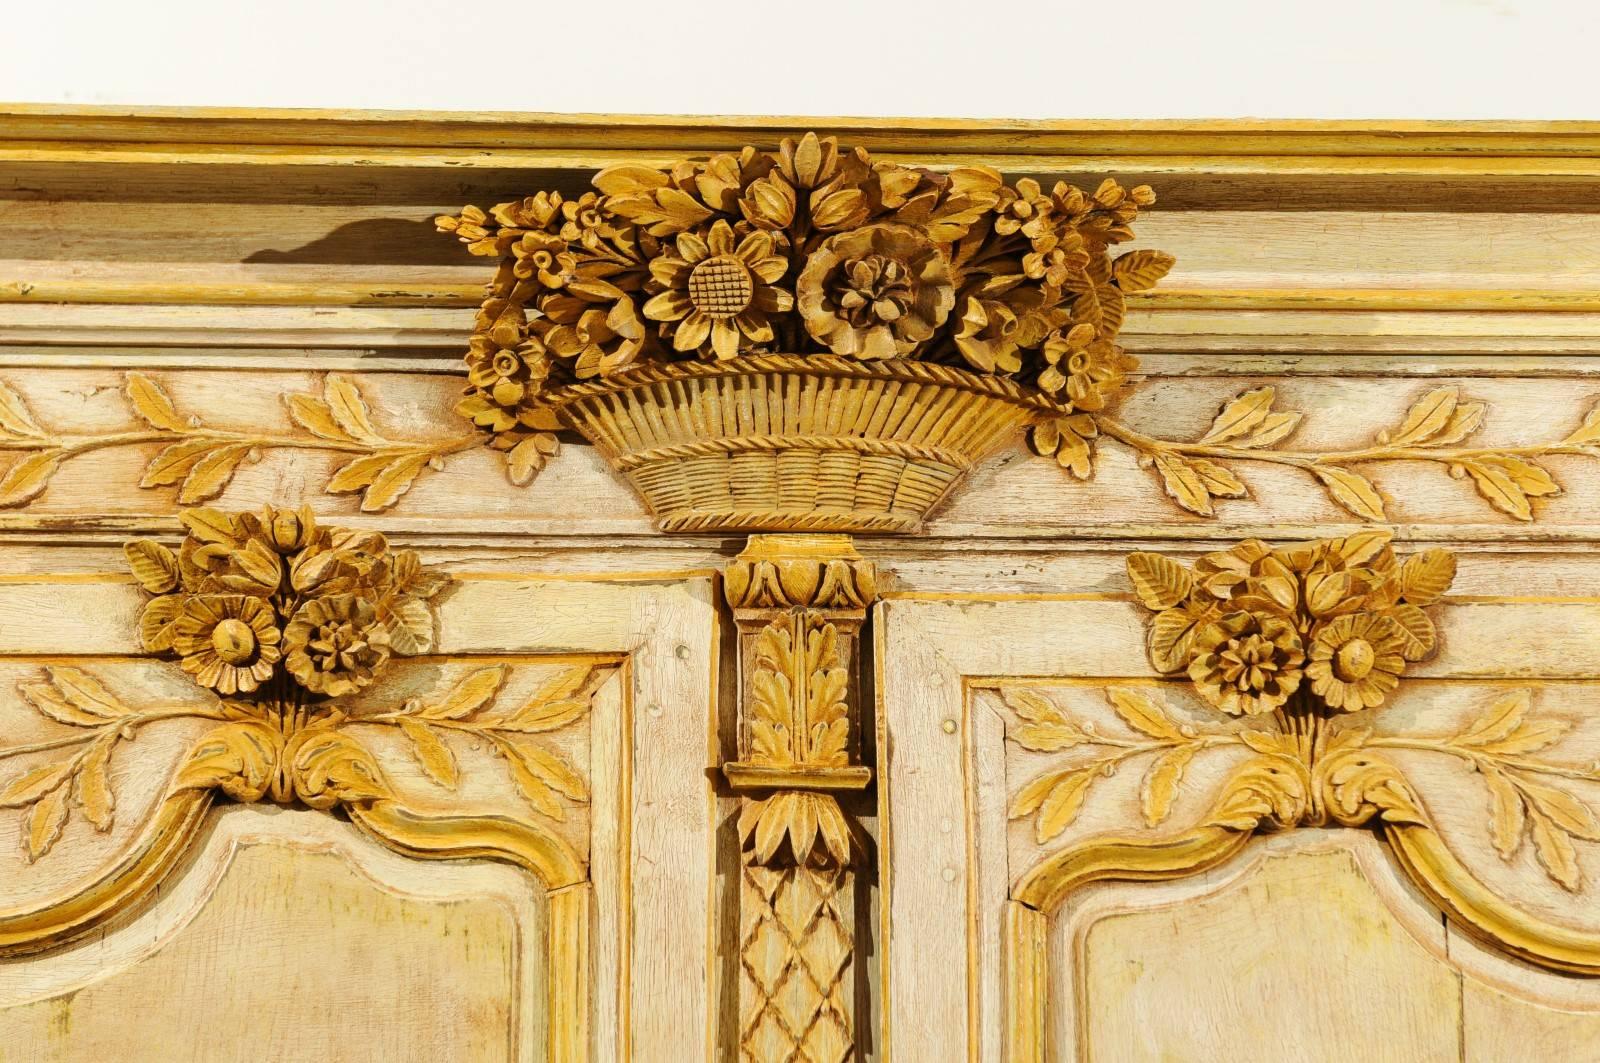 Wood French Mid-18th Century Transition Painted Armoire with Floral Carved Cornice